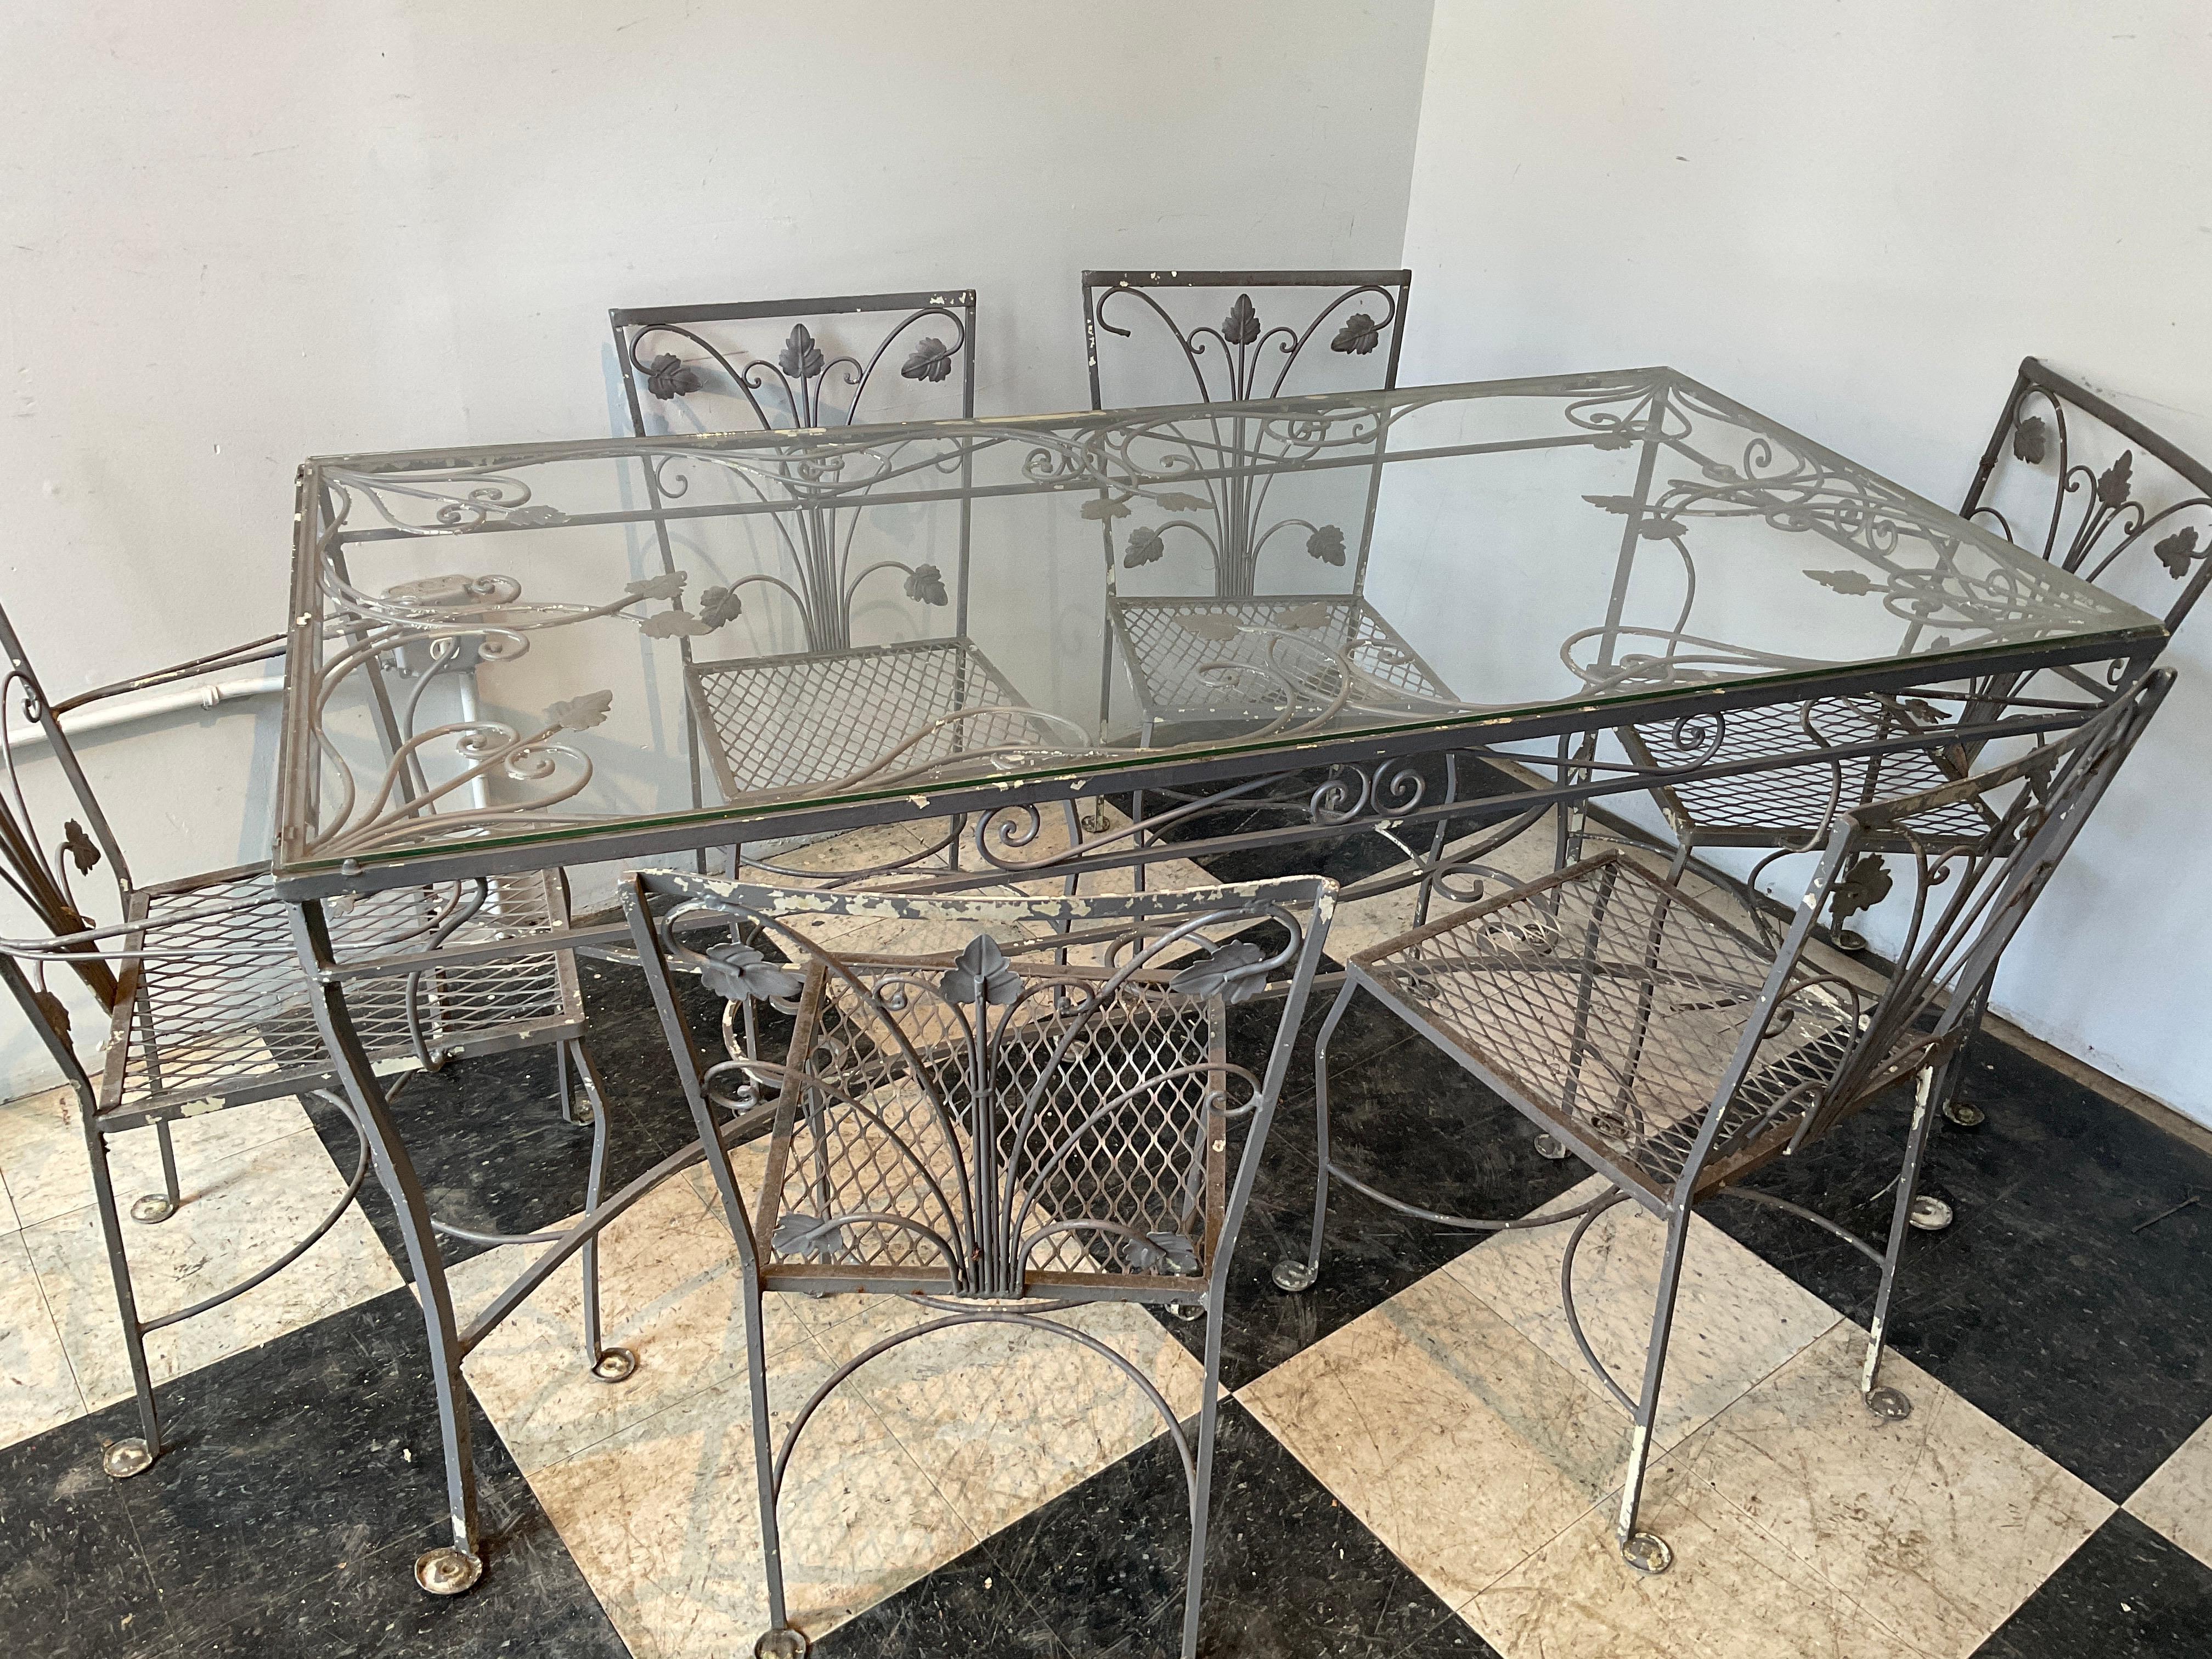 1960s wrought iron Salterini dining set with 6 chairs. Needs painting.